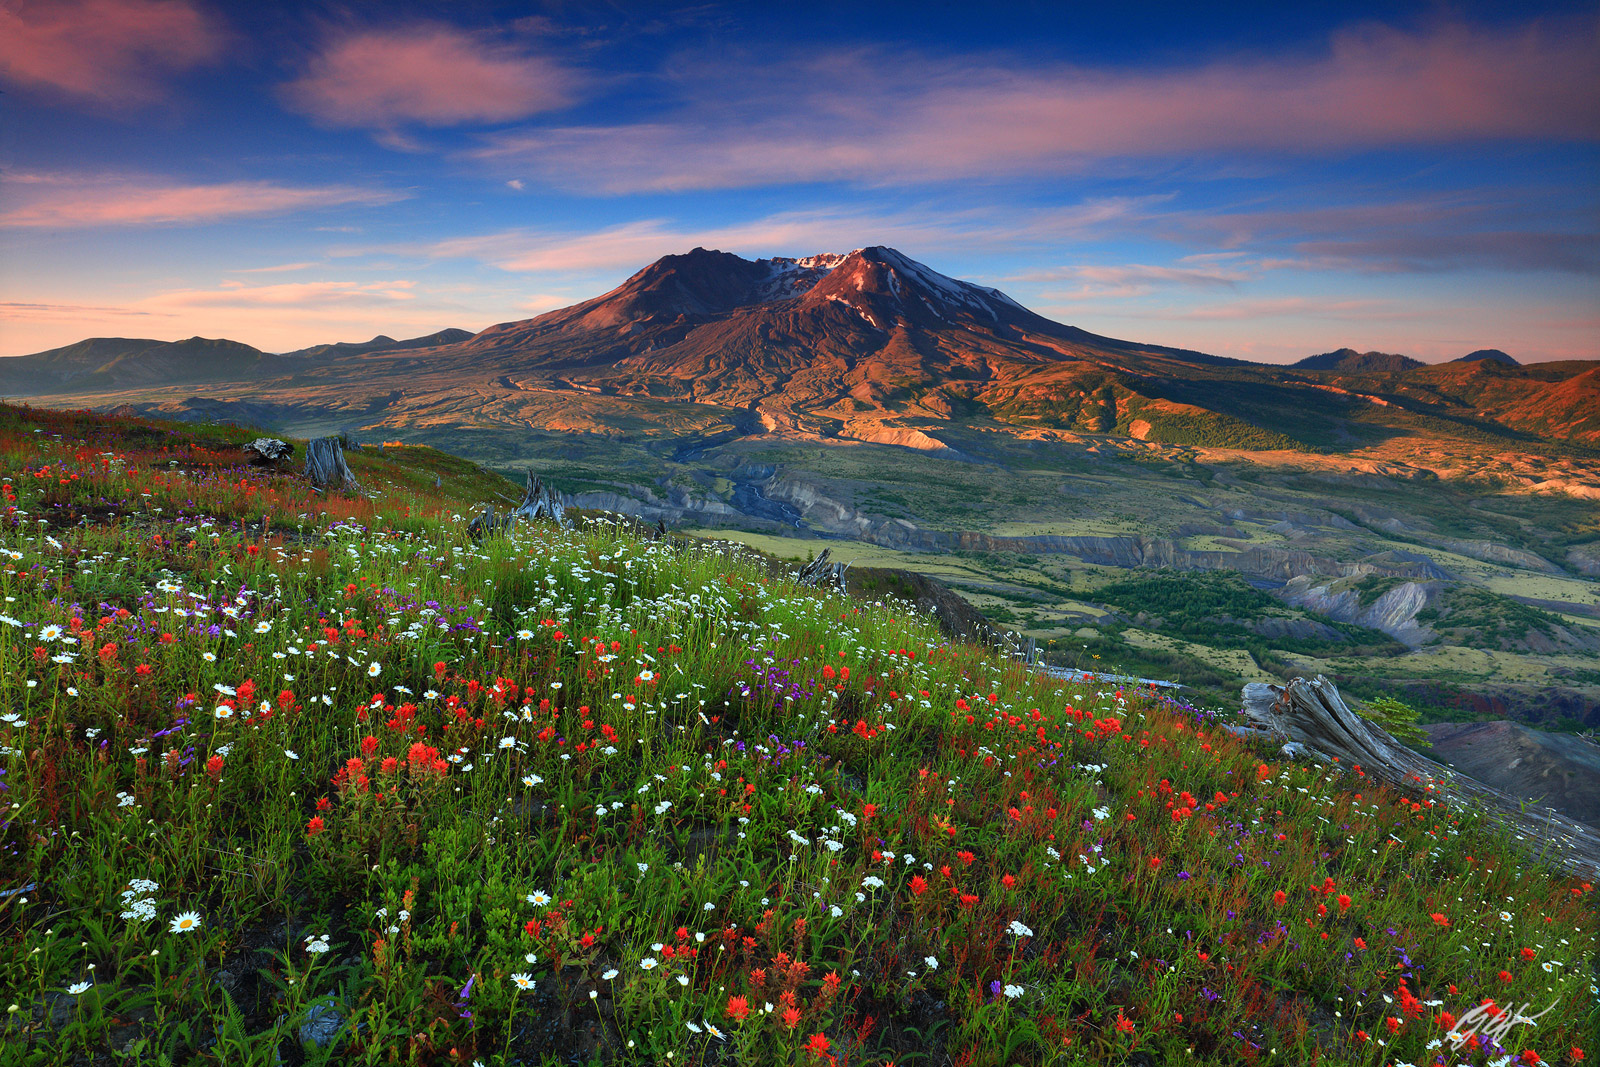 Sunrise Wildflowers and Mt St Helens from Johnston Ridge in Mt St Helens National Volcanic Monument in Washington